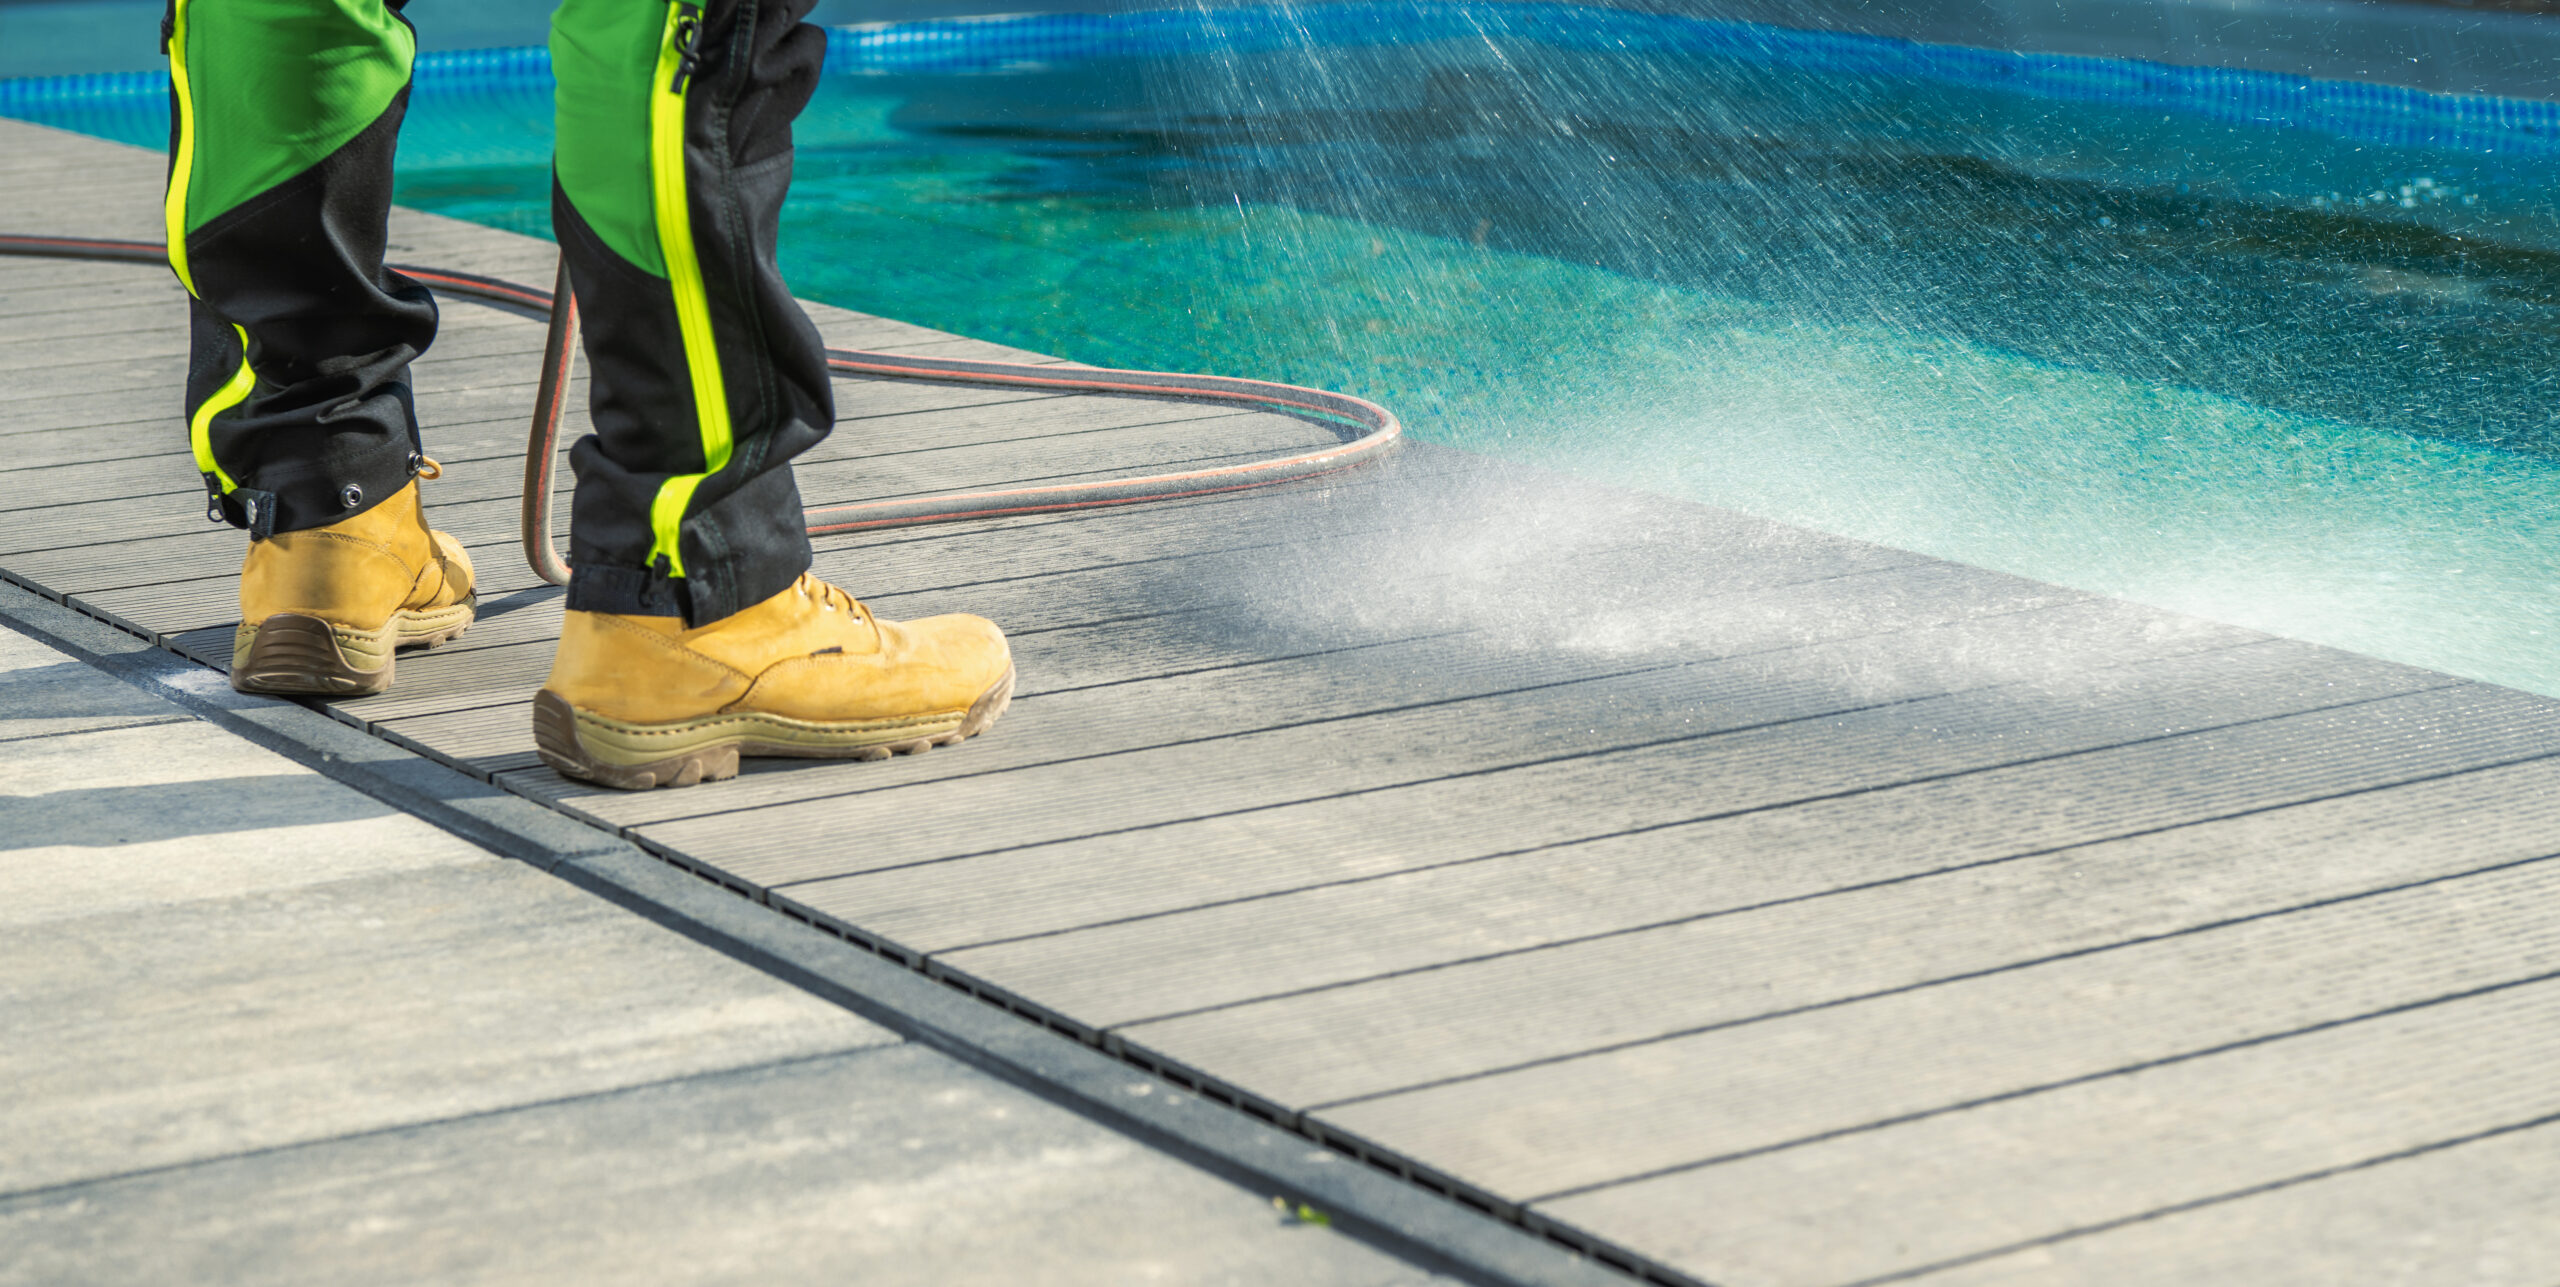 Cleaning a pool deck, demonstrating the process of maintaining and ensuring the cleanliness of the deck area surrounding the pool.